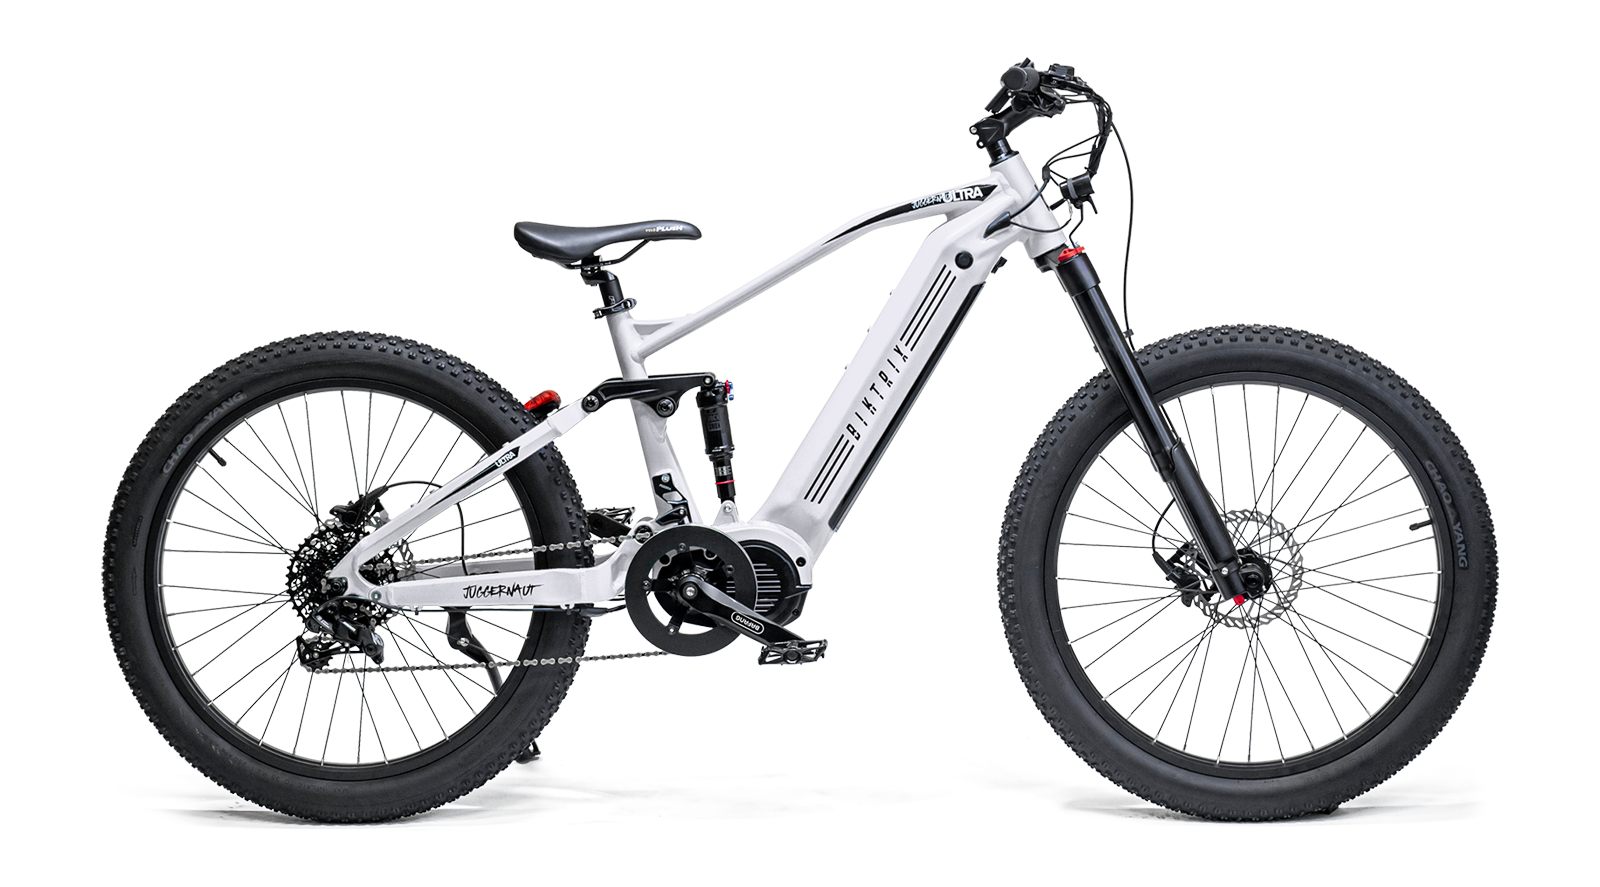 5 Best Electric Dirt Bike for On and Off-Road Adventures